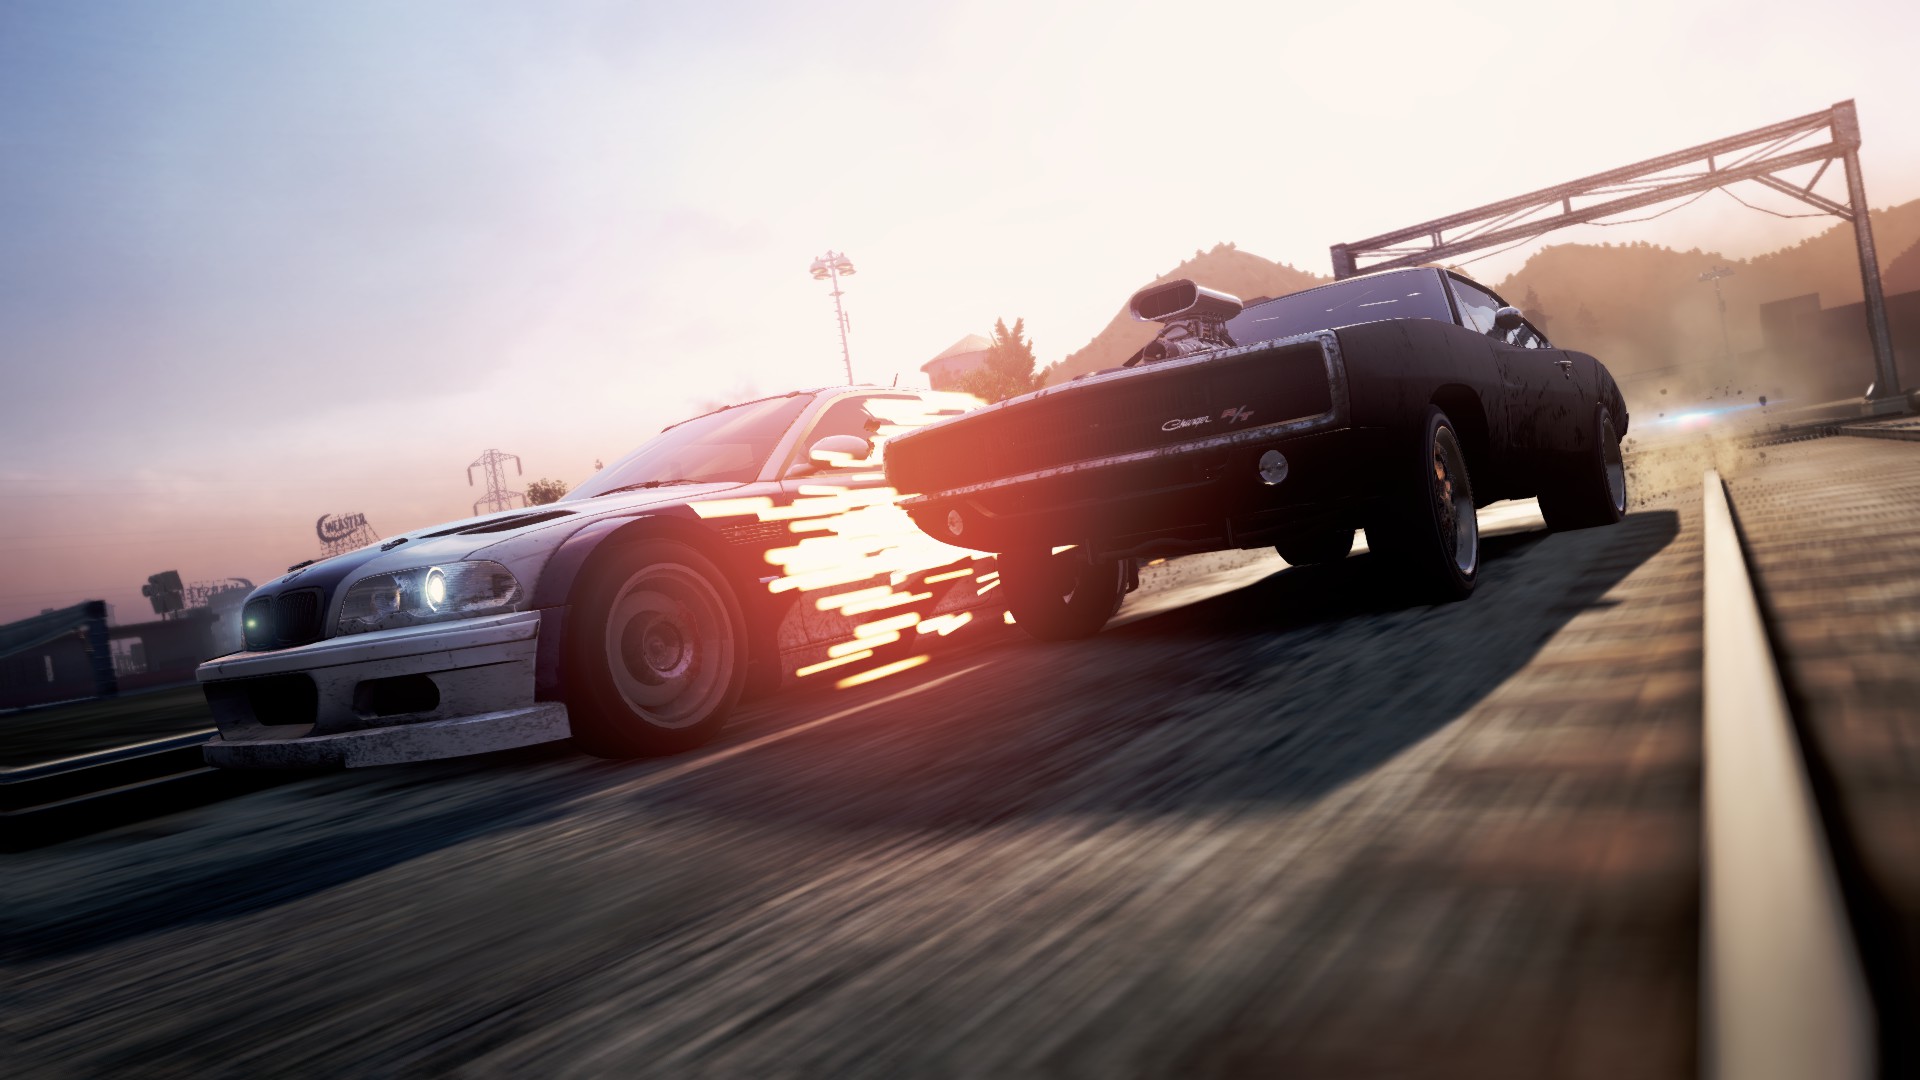 General 1920x1080 Need for Speed Need for Speed: Most Wanted sparks BMW M3 GTR Dodge Dodge Charger muscle cars German cars Electronic Arts BMW railway American cars video games sunlight sky motion blur frontal view headlights vehicle car CGI video game art screen shot